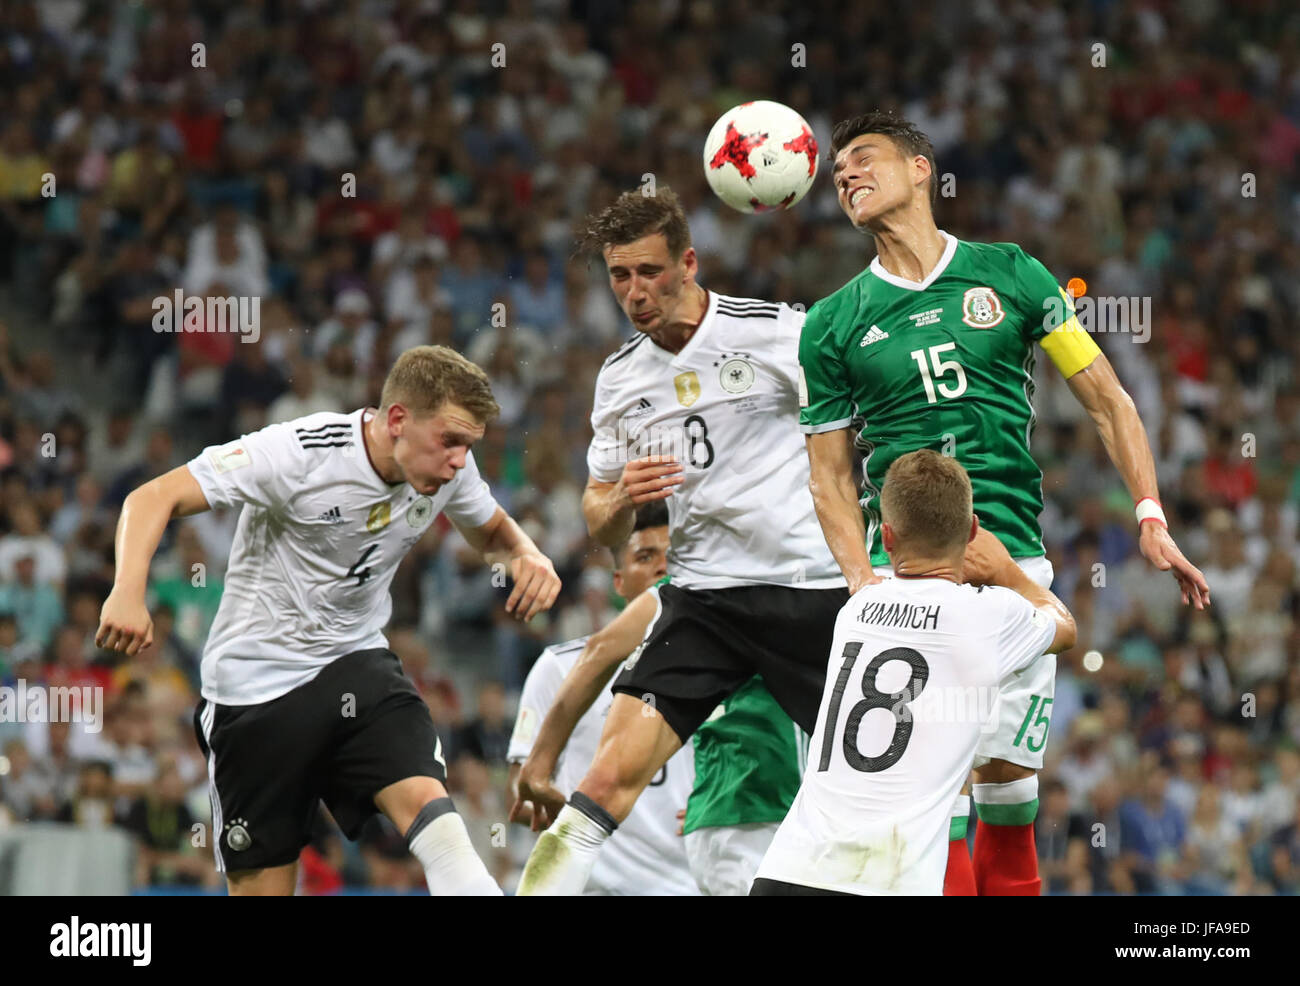 Sochi, Russia. 29th June, 2017. Leon Goretzka (top R2) of Germany competes for a header with Hector Moreno (top R1) of Mexico during the semifinal match of the 2017 FIFA Confederations Cup in Sochi, Russia, June 29, 2017. Germany won 4-1. Credit: Xu Zijian/Xinhua/Alamy Live News Stock Photo